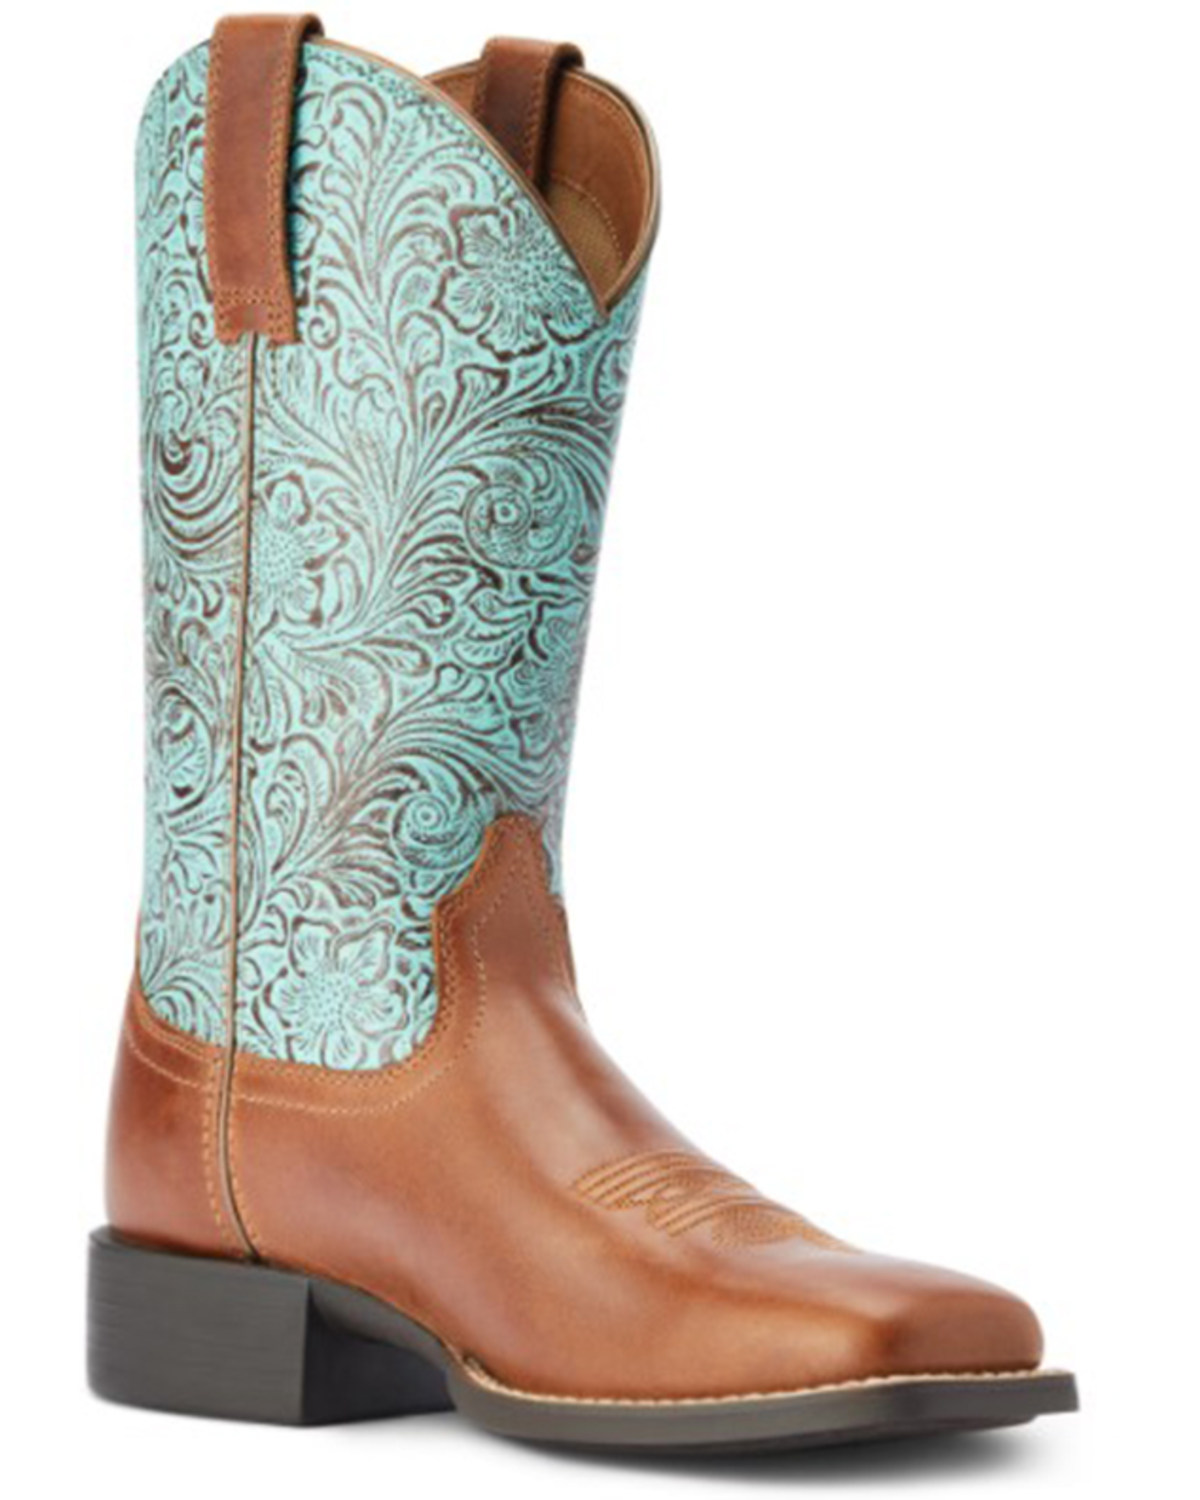 Ariat Women's Round Up Embossed Floral Print Performance Western Boots - Broad Square Toe